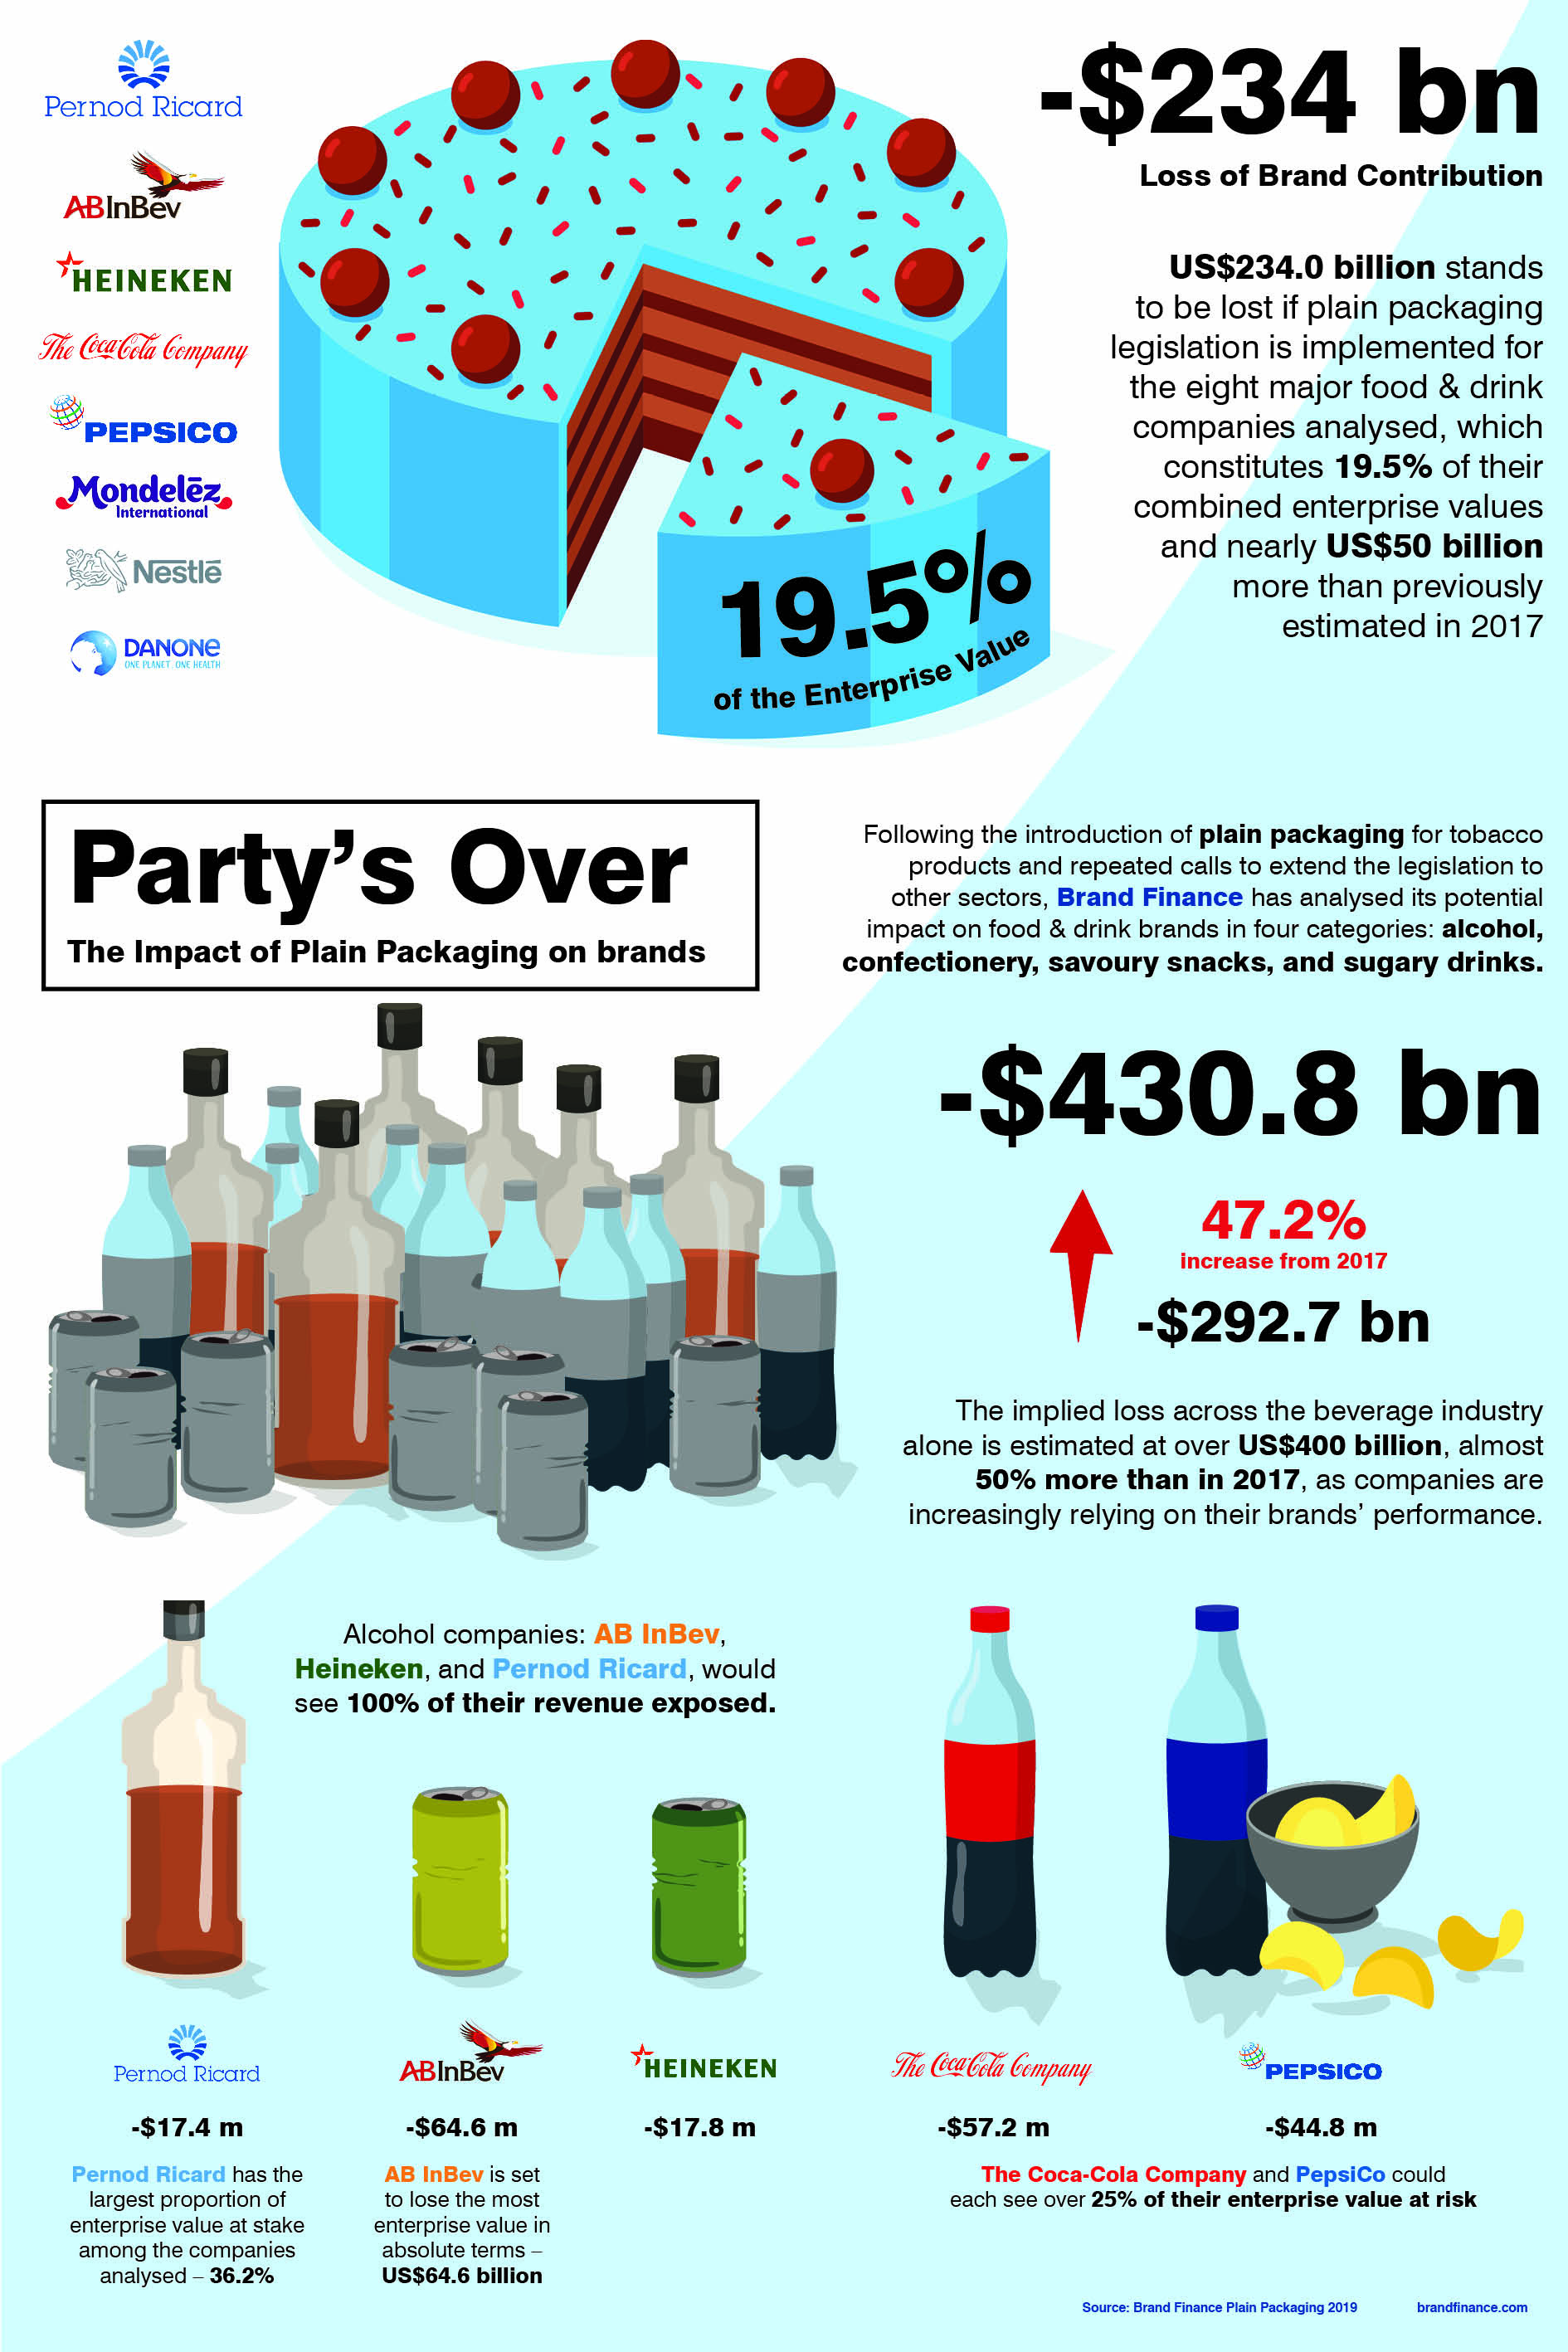 More Than $400 Billion at Stake in the Beverage Industry